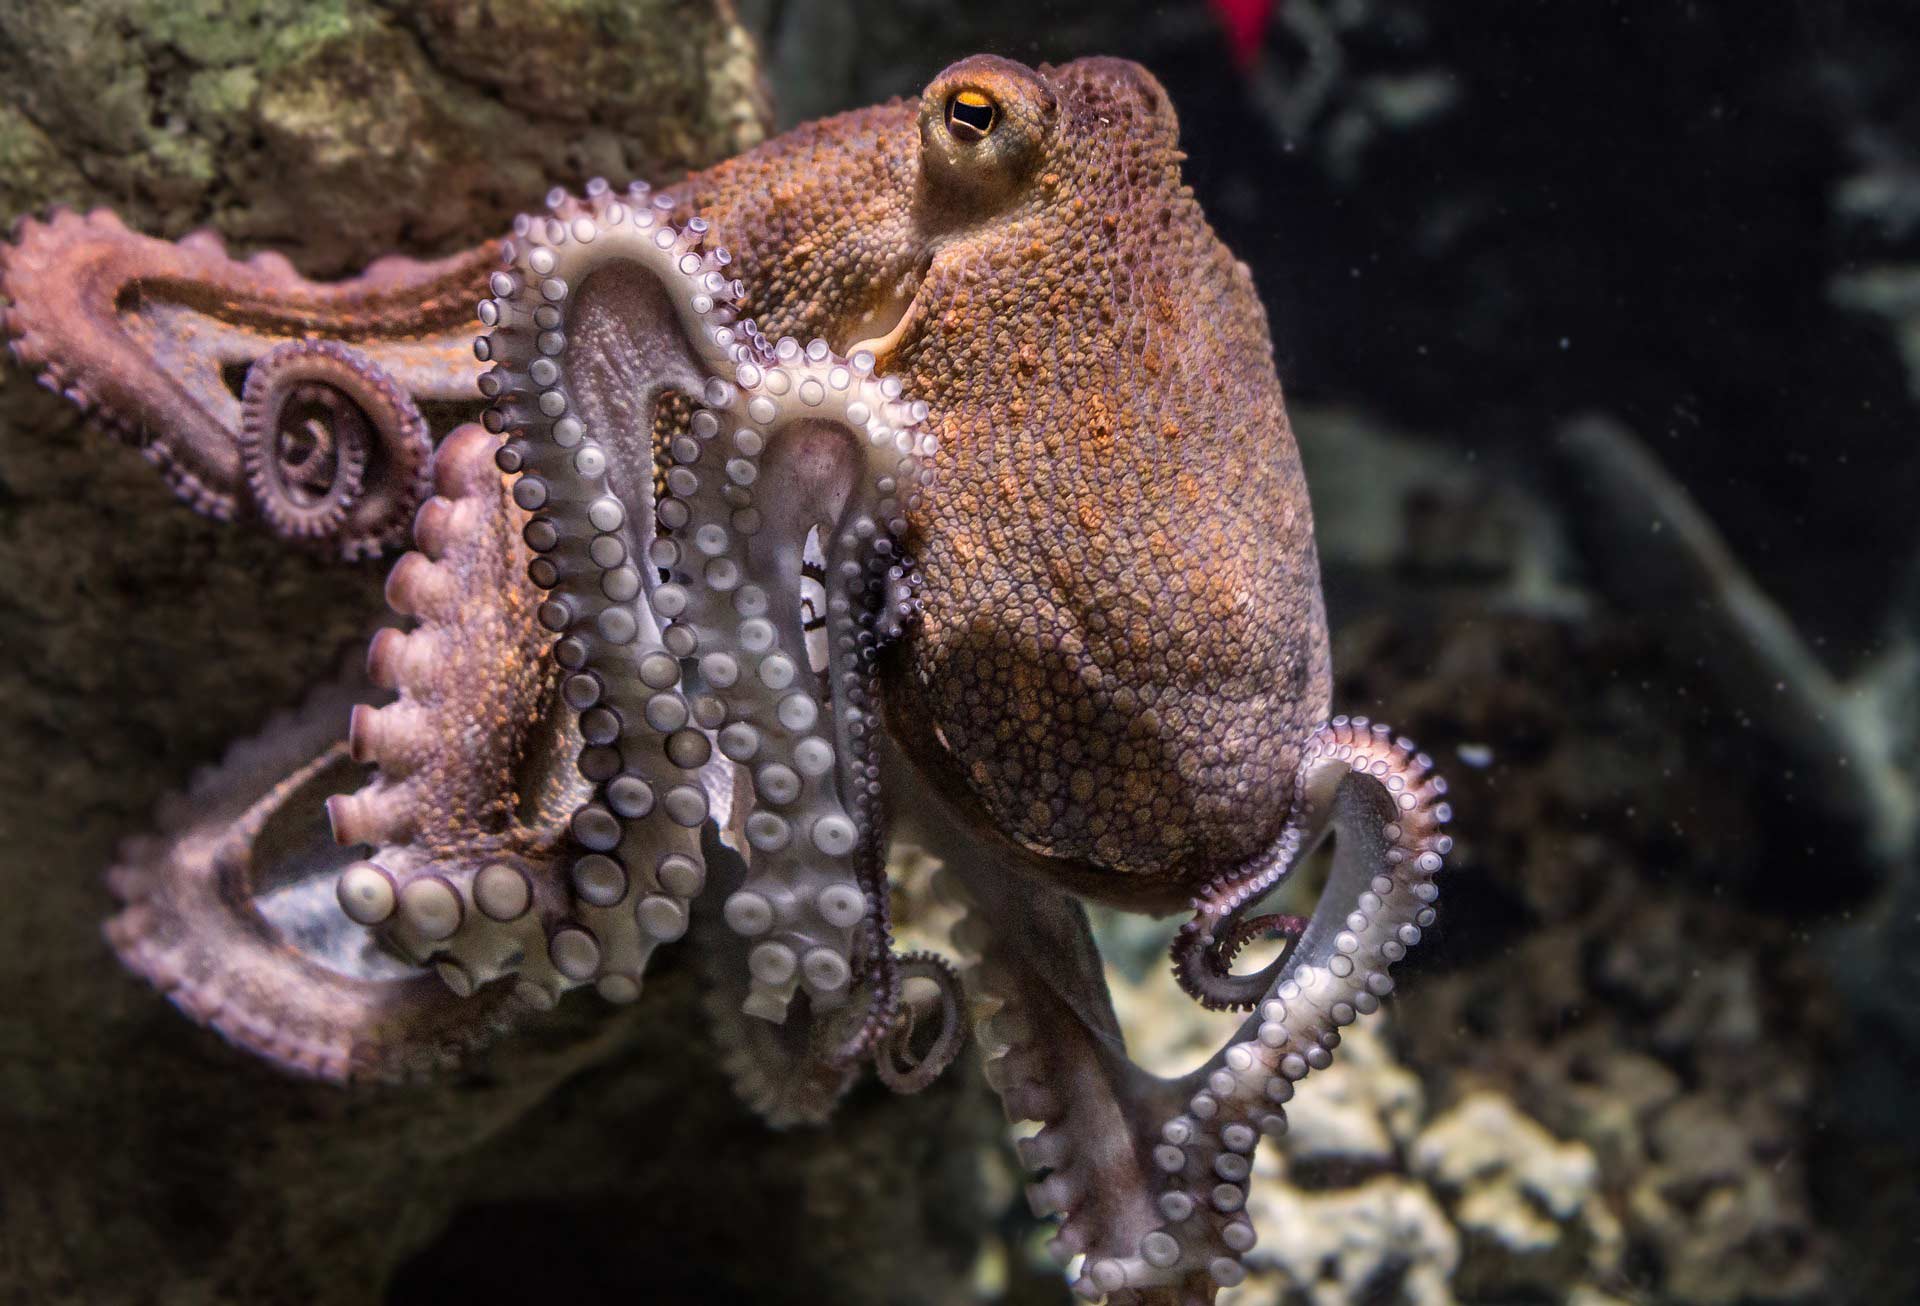 an octopus has 3 hearts, 9 brains and blue blood.